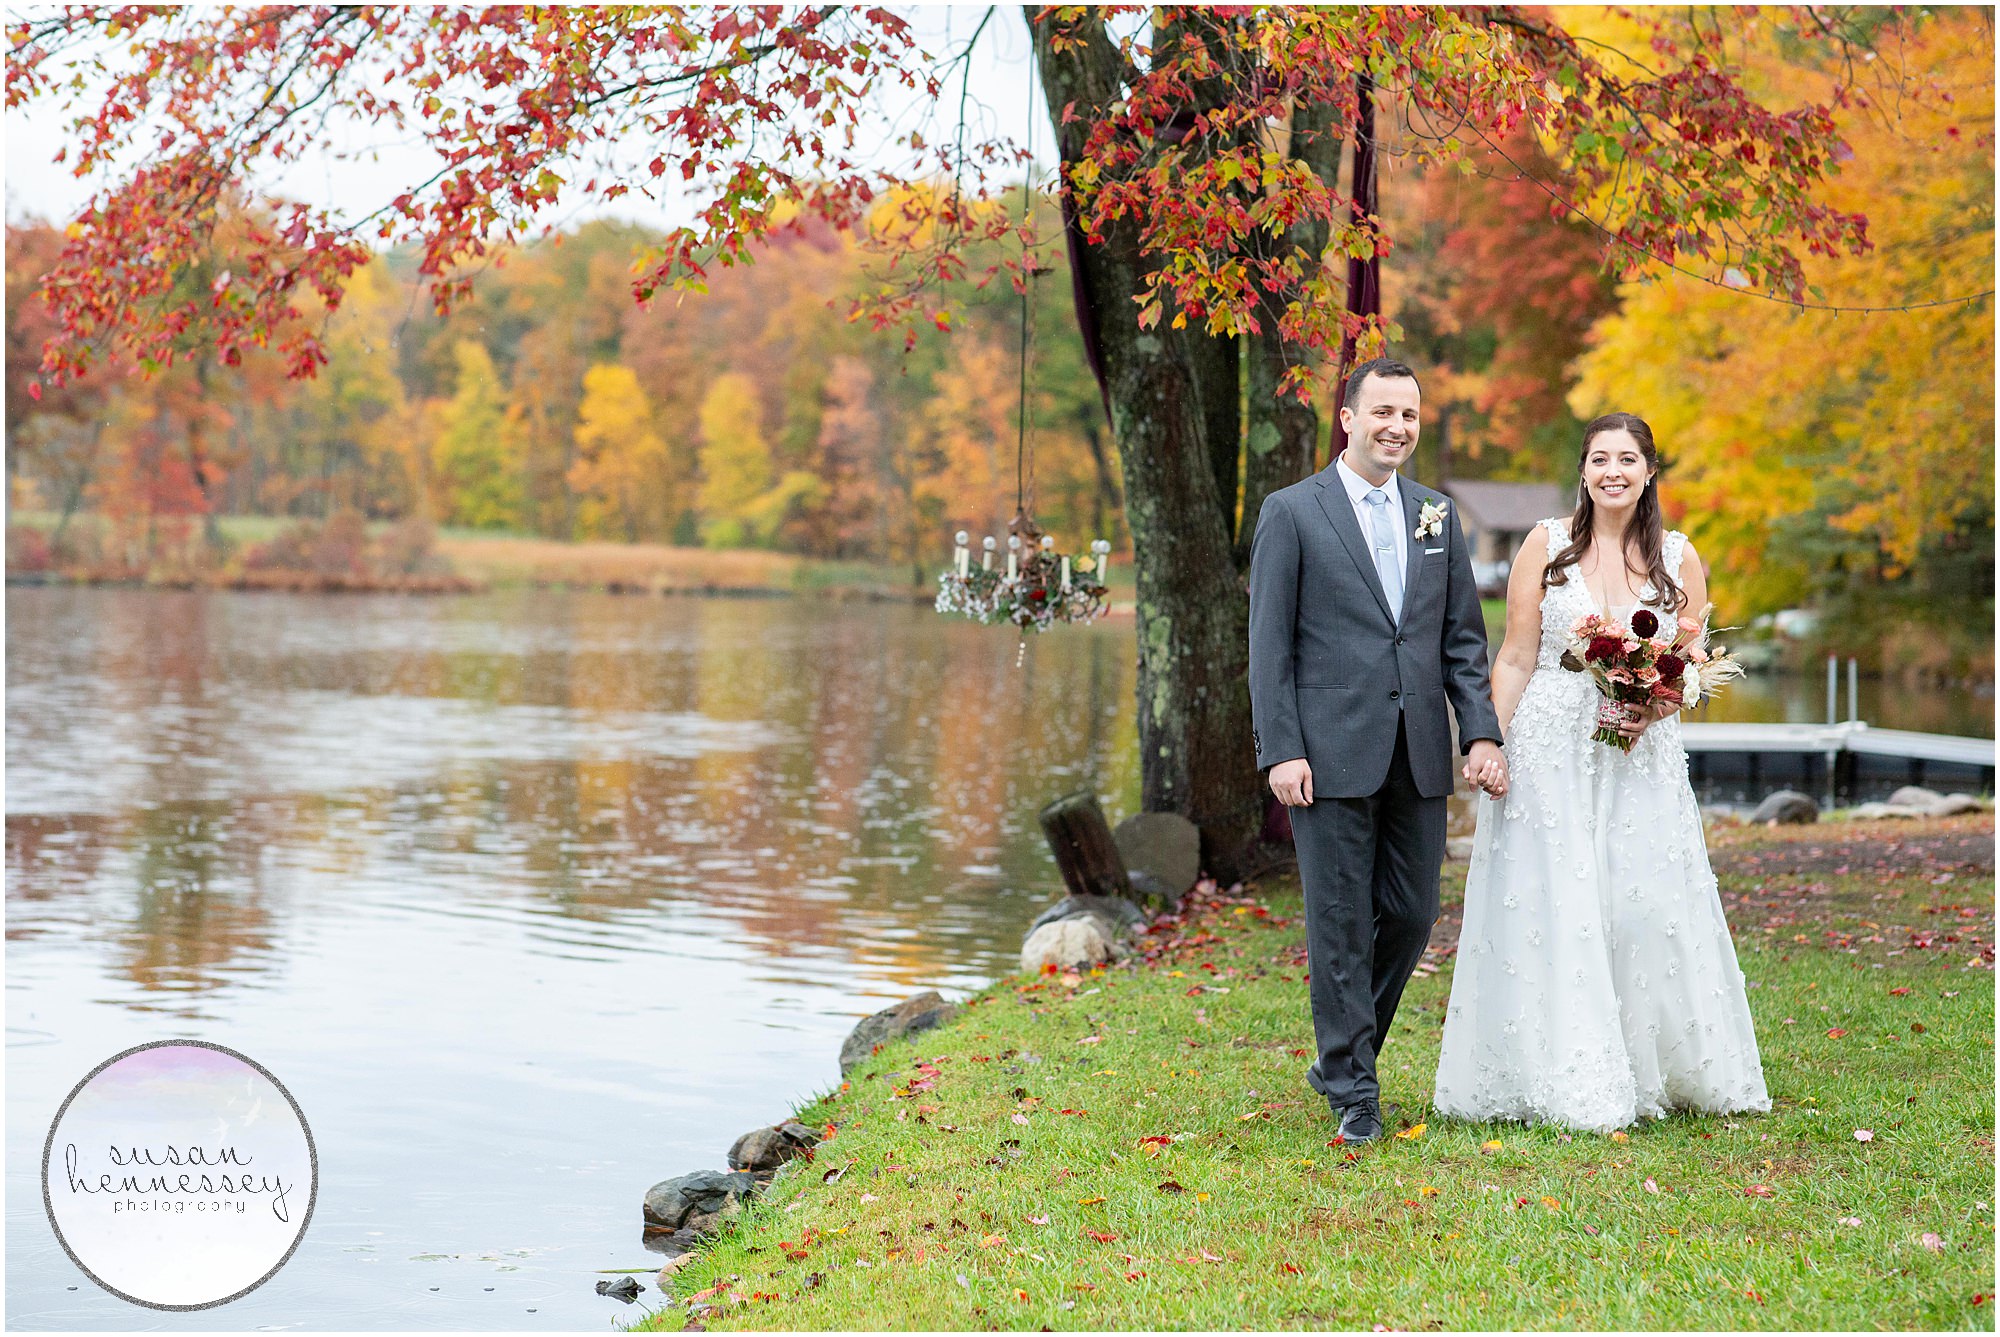 Romantic and intimate Andre's Lakeside Dining Microwedding